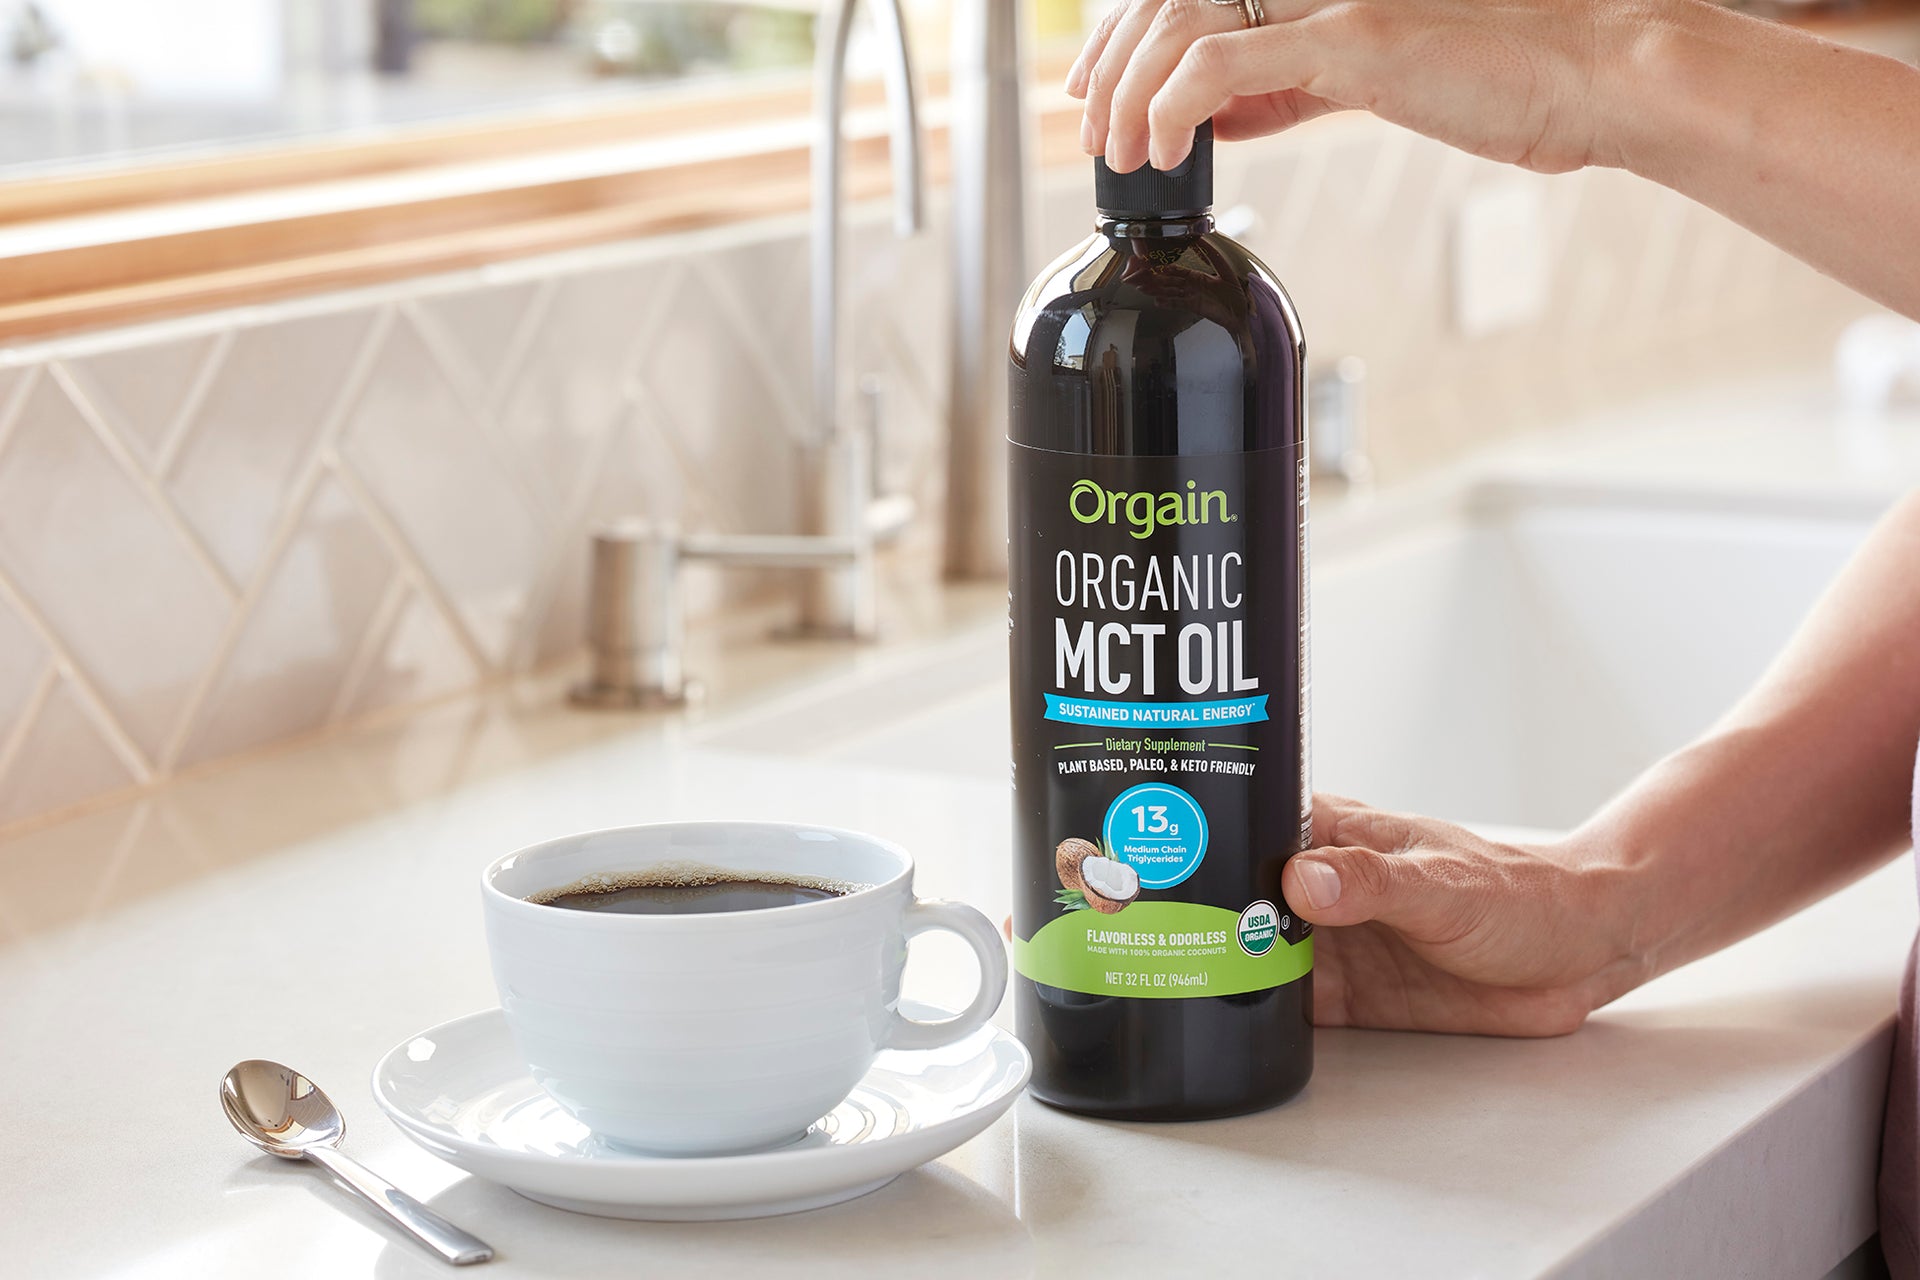 What Is MCT Oil?